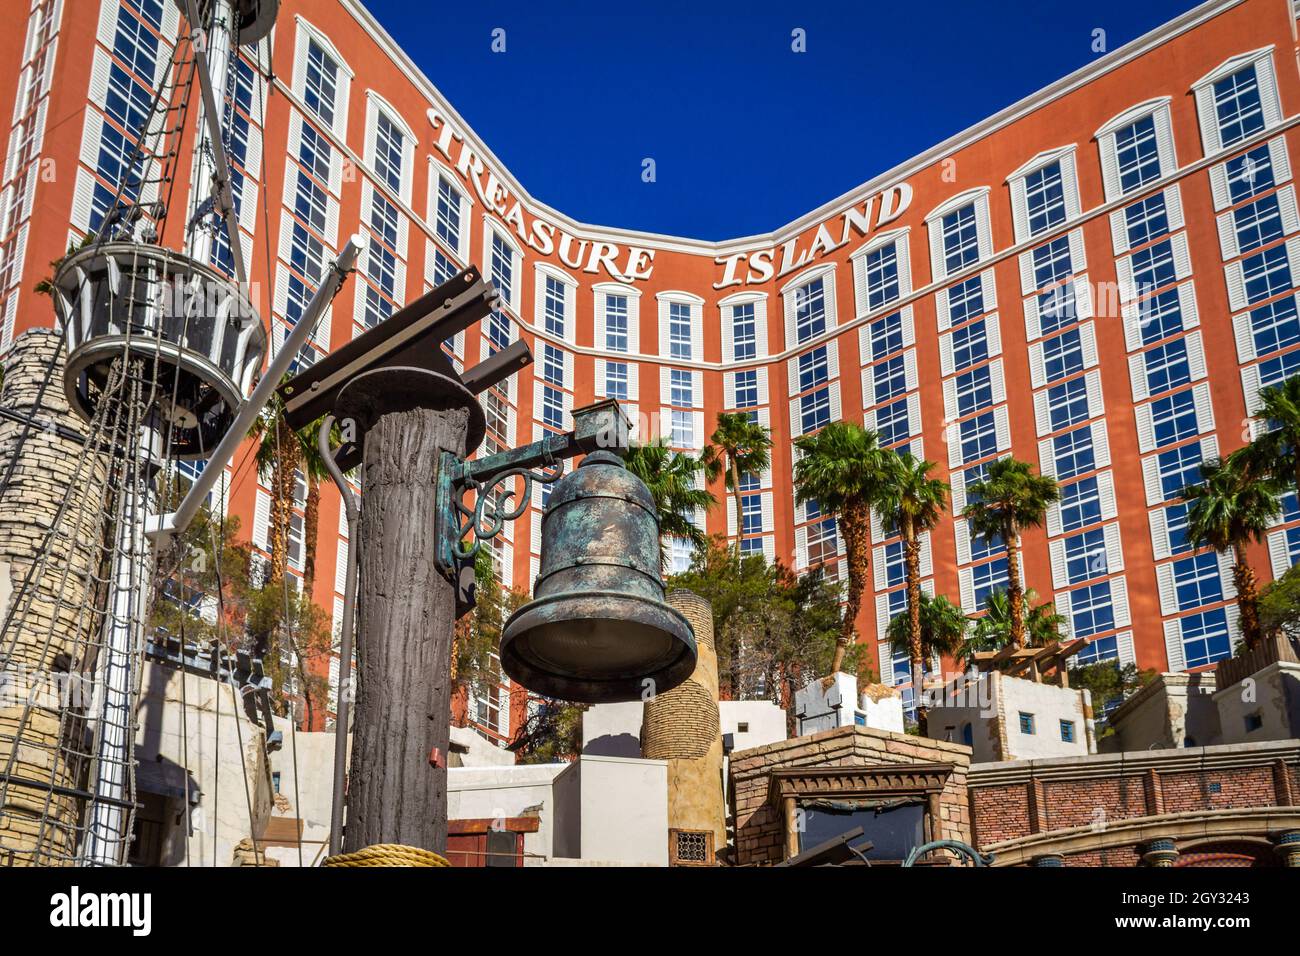 Las Vegas, NV, USA – June 8, 2021: Antique bell at the Pirate’s dock in front of Treasure Island Hotel and Casino located in Las Vegas, Nevada. Stock Photo